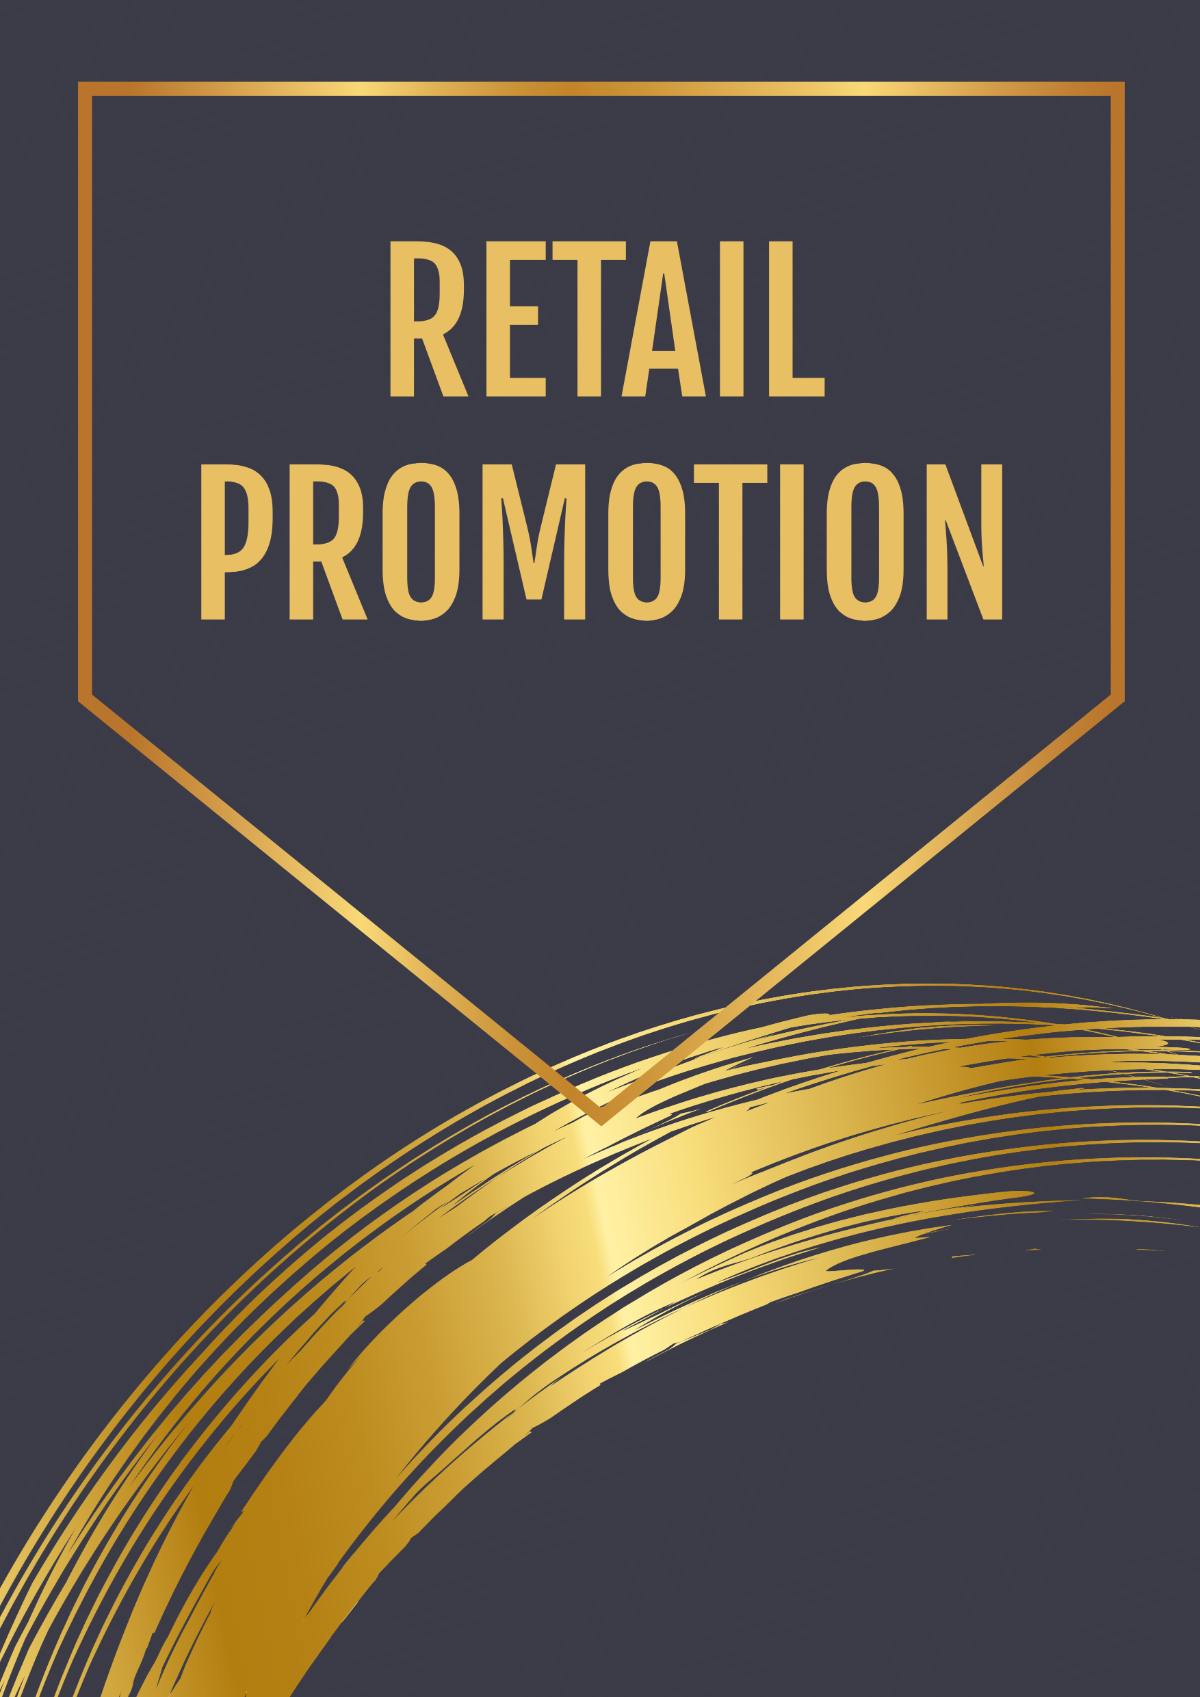 Free Retail Promotion Signage Template